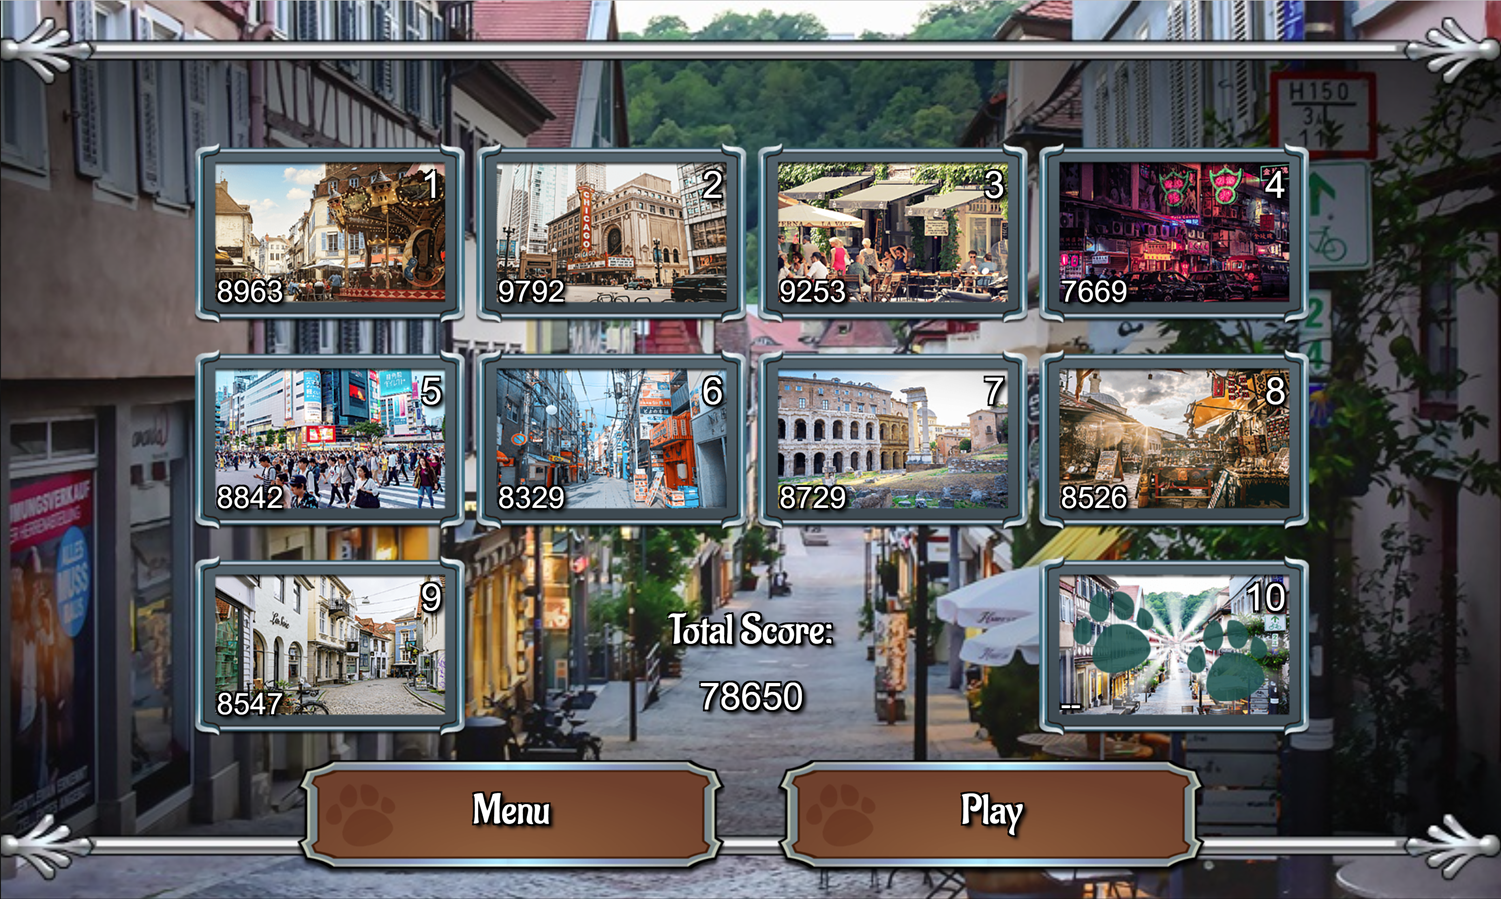 Hunting Jack in the City Game Level Select Screen Screenshot.